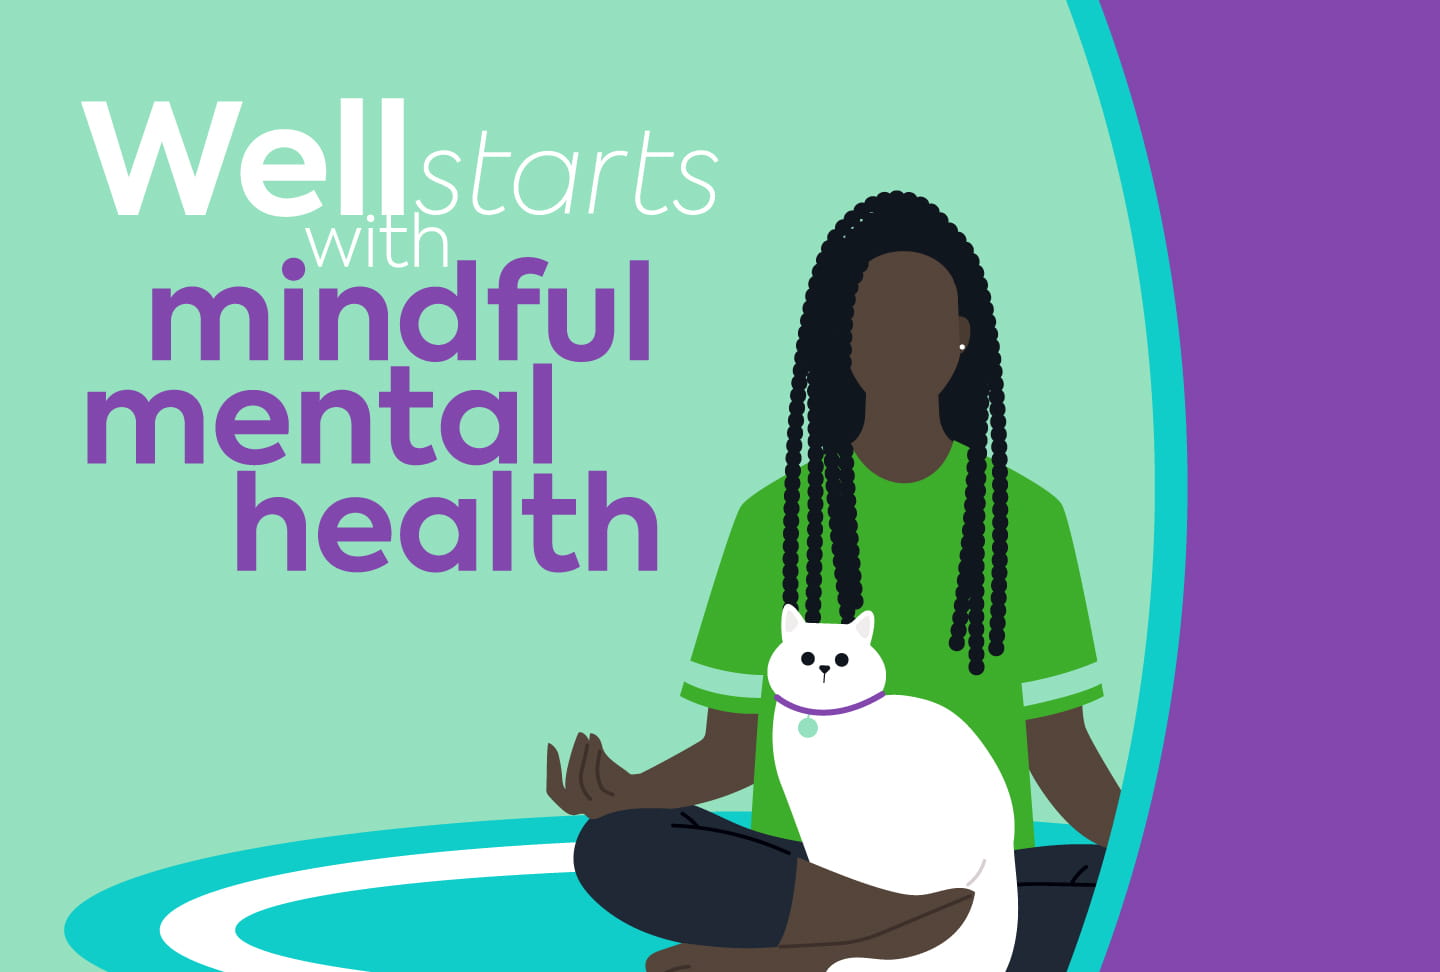 Illustration of person meditating with cat. Text reads "Well starts with mindful mental health"